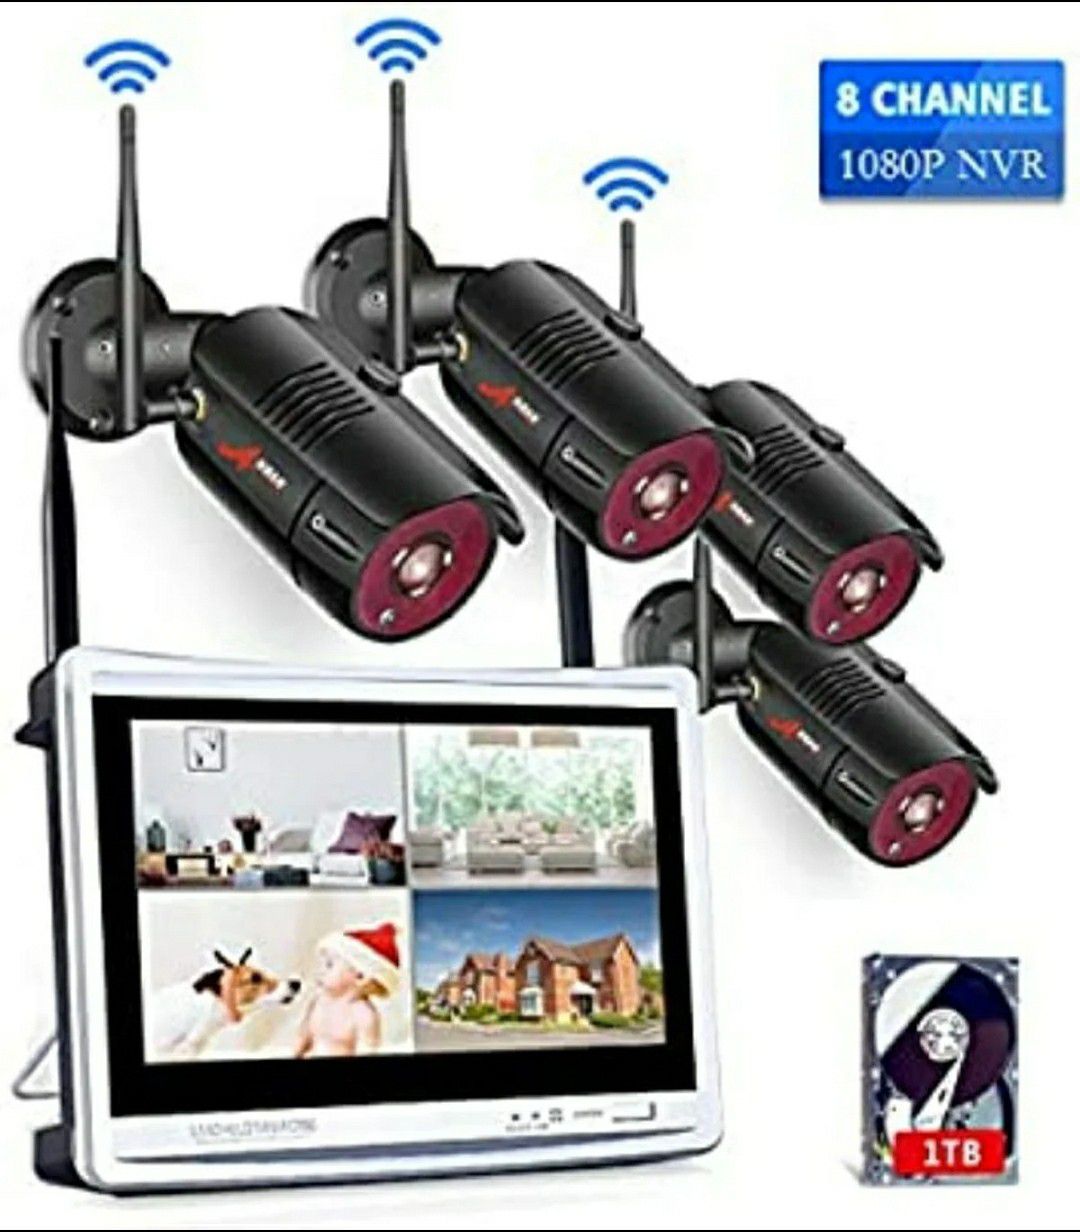 Home Security Camera System Wireless Jennov 1080P 4pcs WiFi Video Surveillance Camera System Outdoor w/ White 12" Monitor